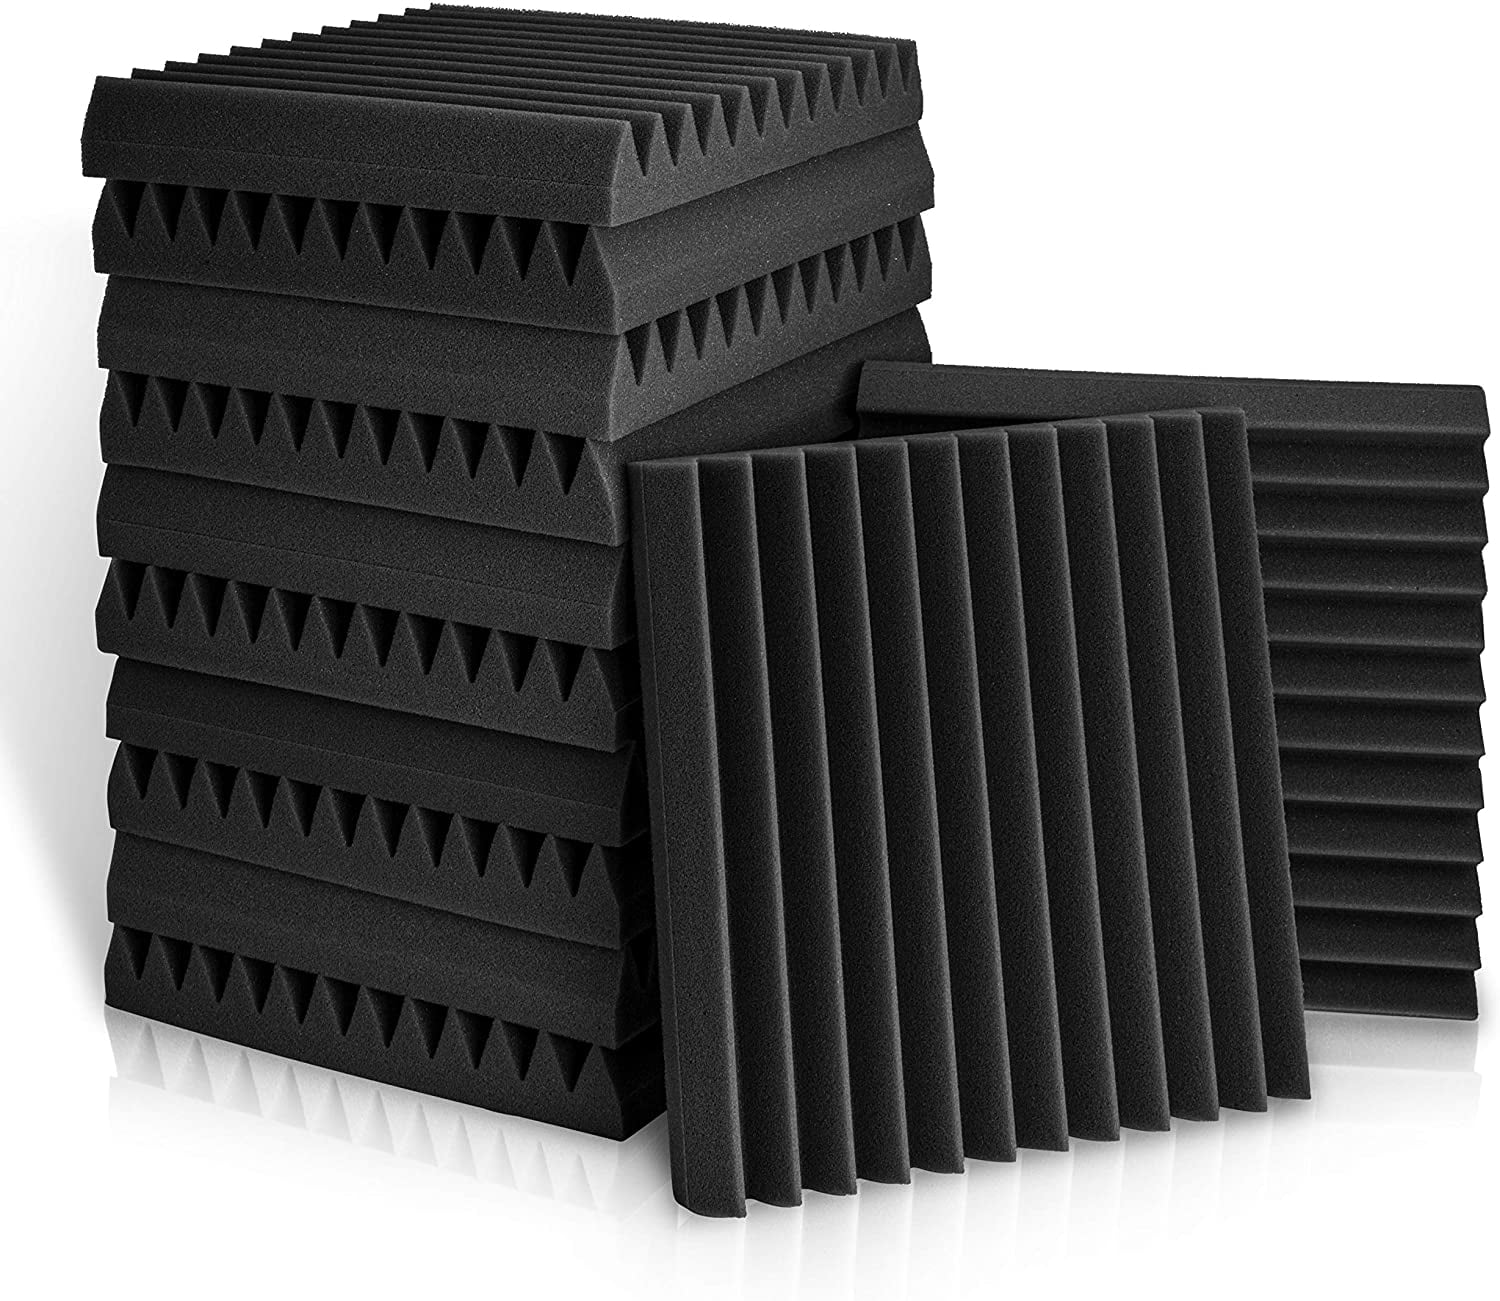 Sound Panels wedges Soundproof Sound Insulation Absorbing Home and Office 12 Pack, Pink Acoustic Panels Studio Wedge Tiles 2 X 12 X 12 Acoustic Foam Panels 